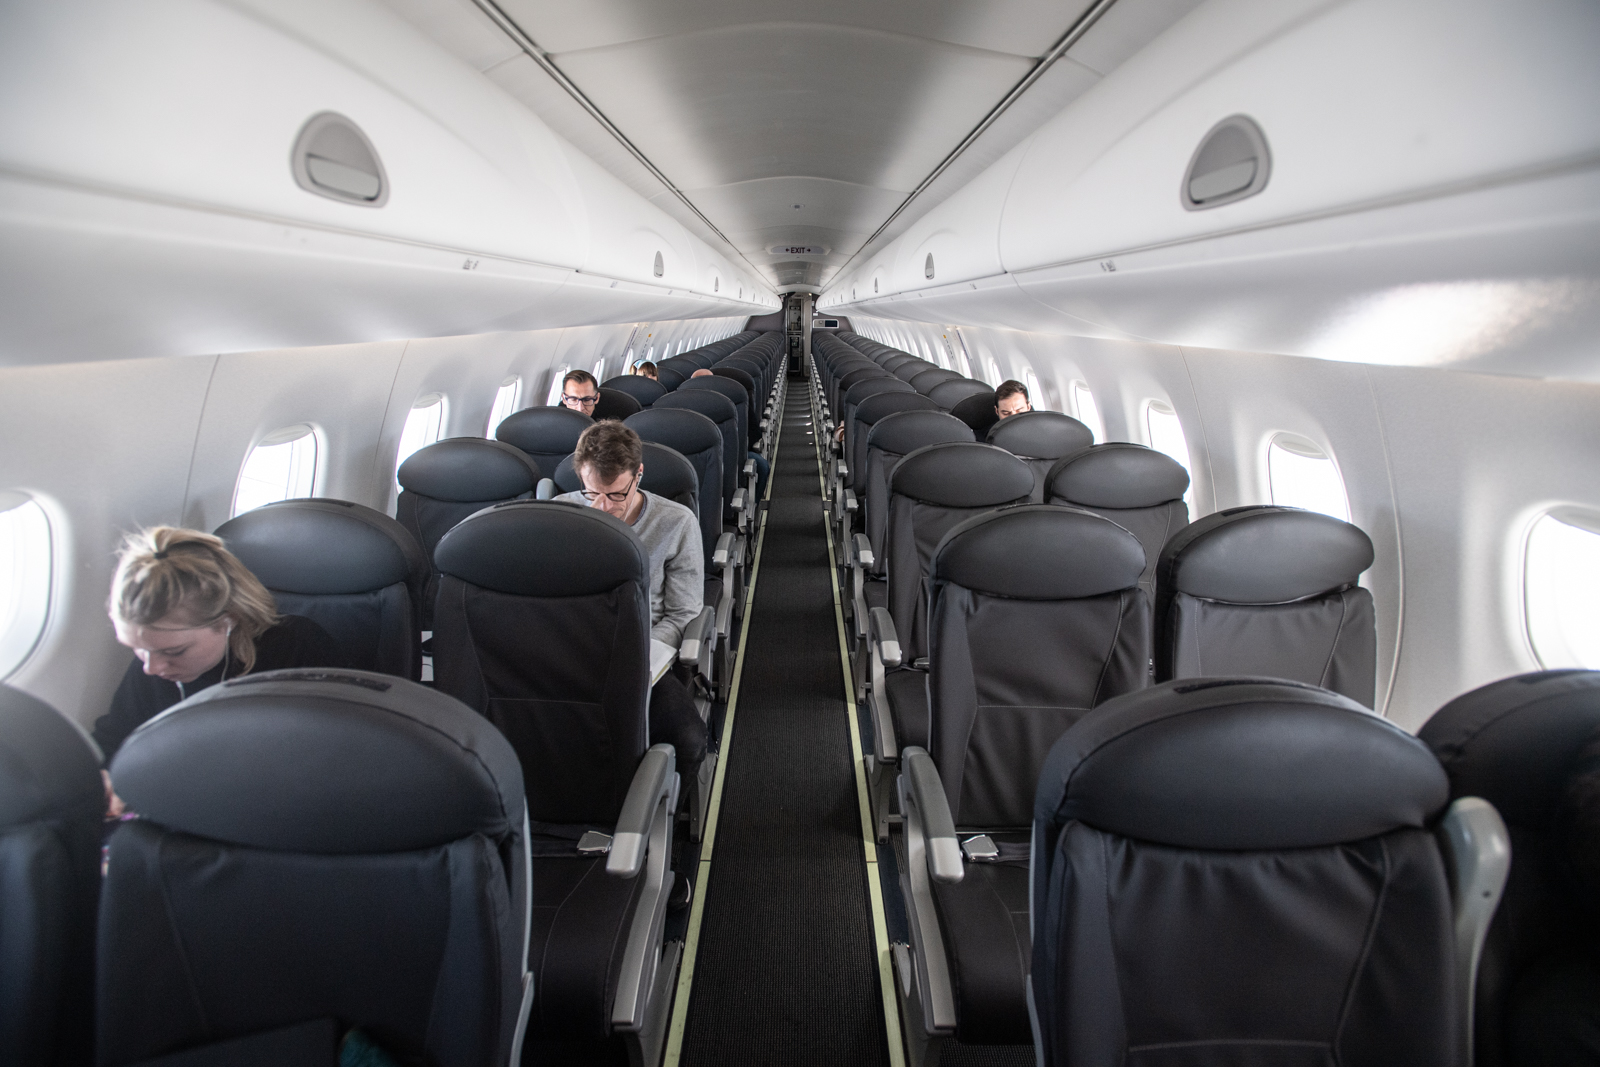 A mostly&nbsp;empty British Airways passenger plane en route from Milan to London on March 5, 2020.&nbsp;